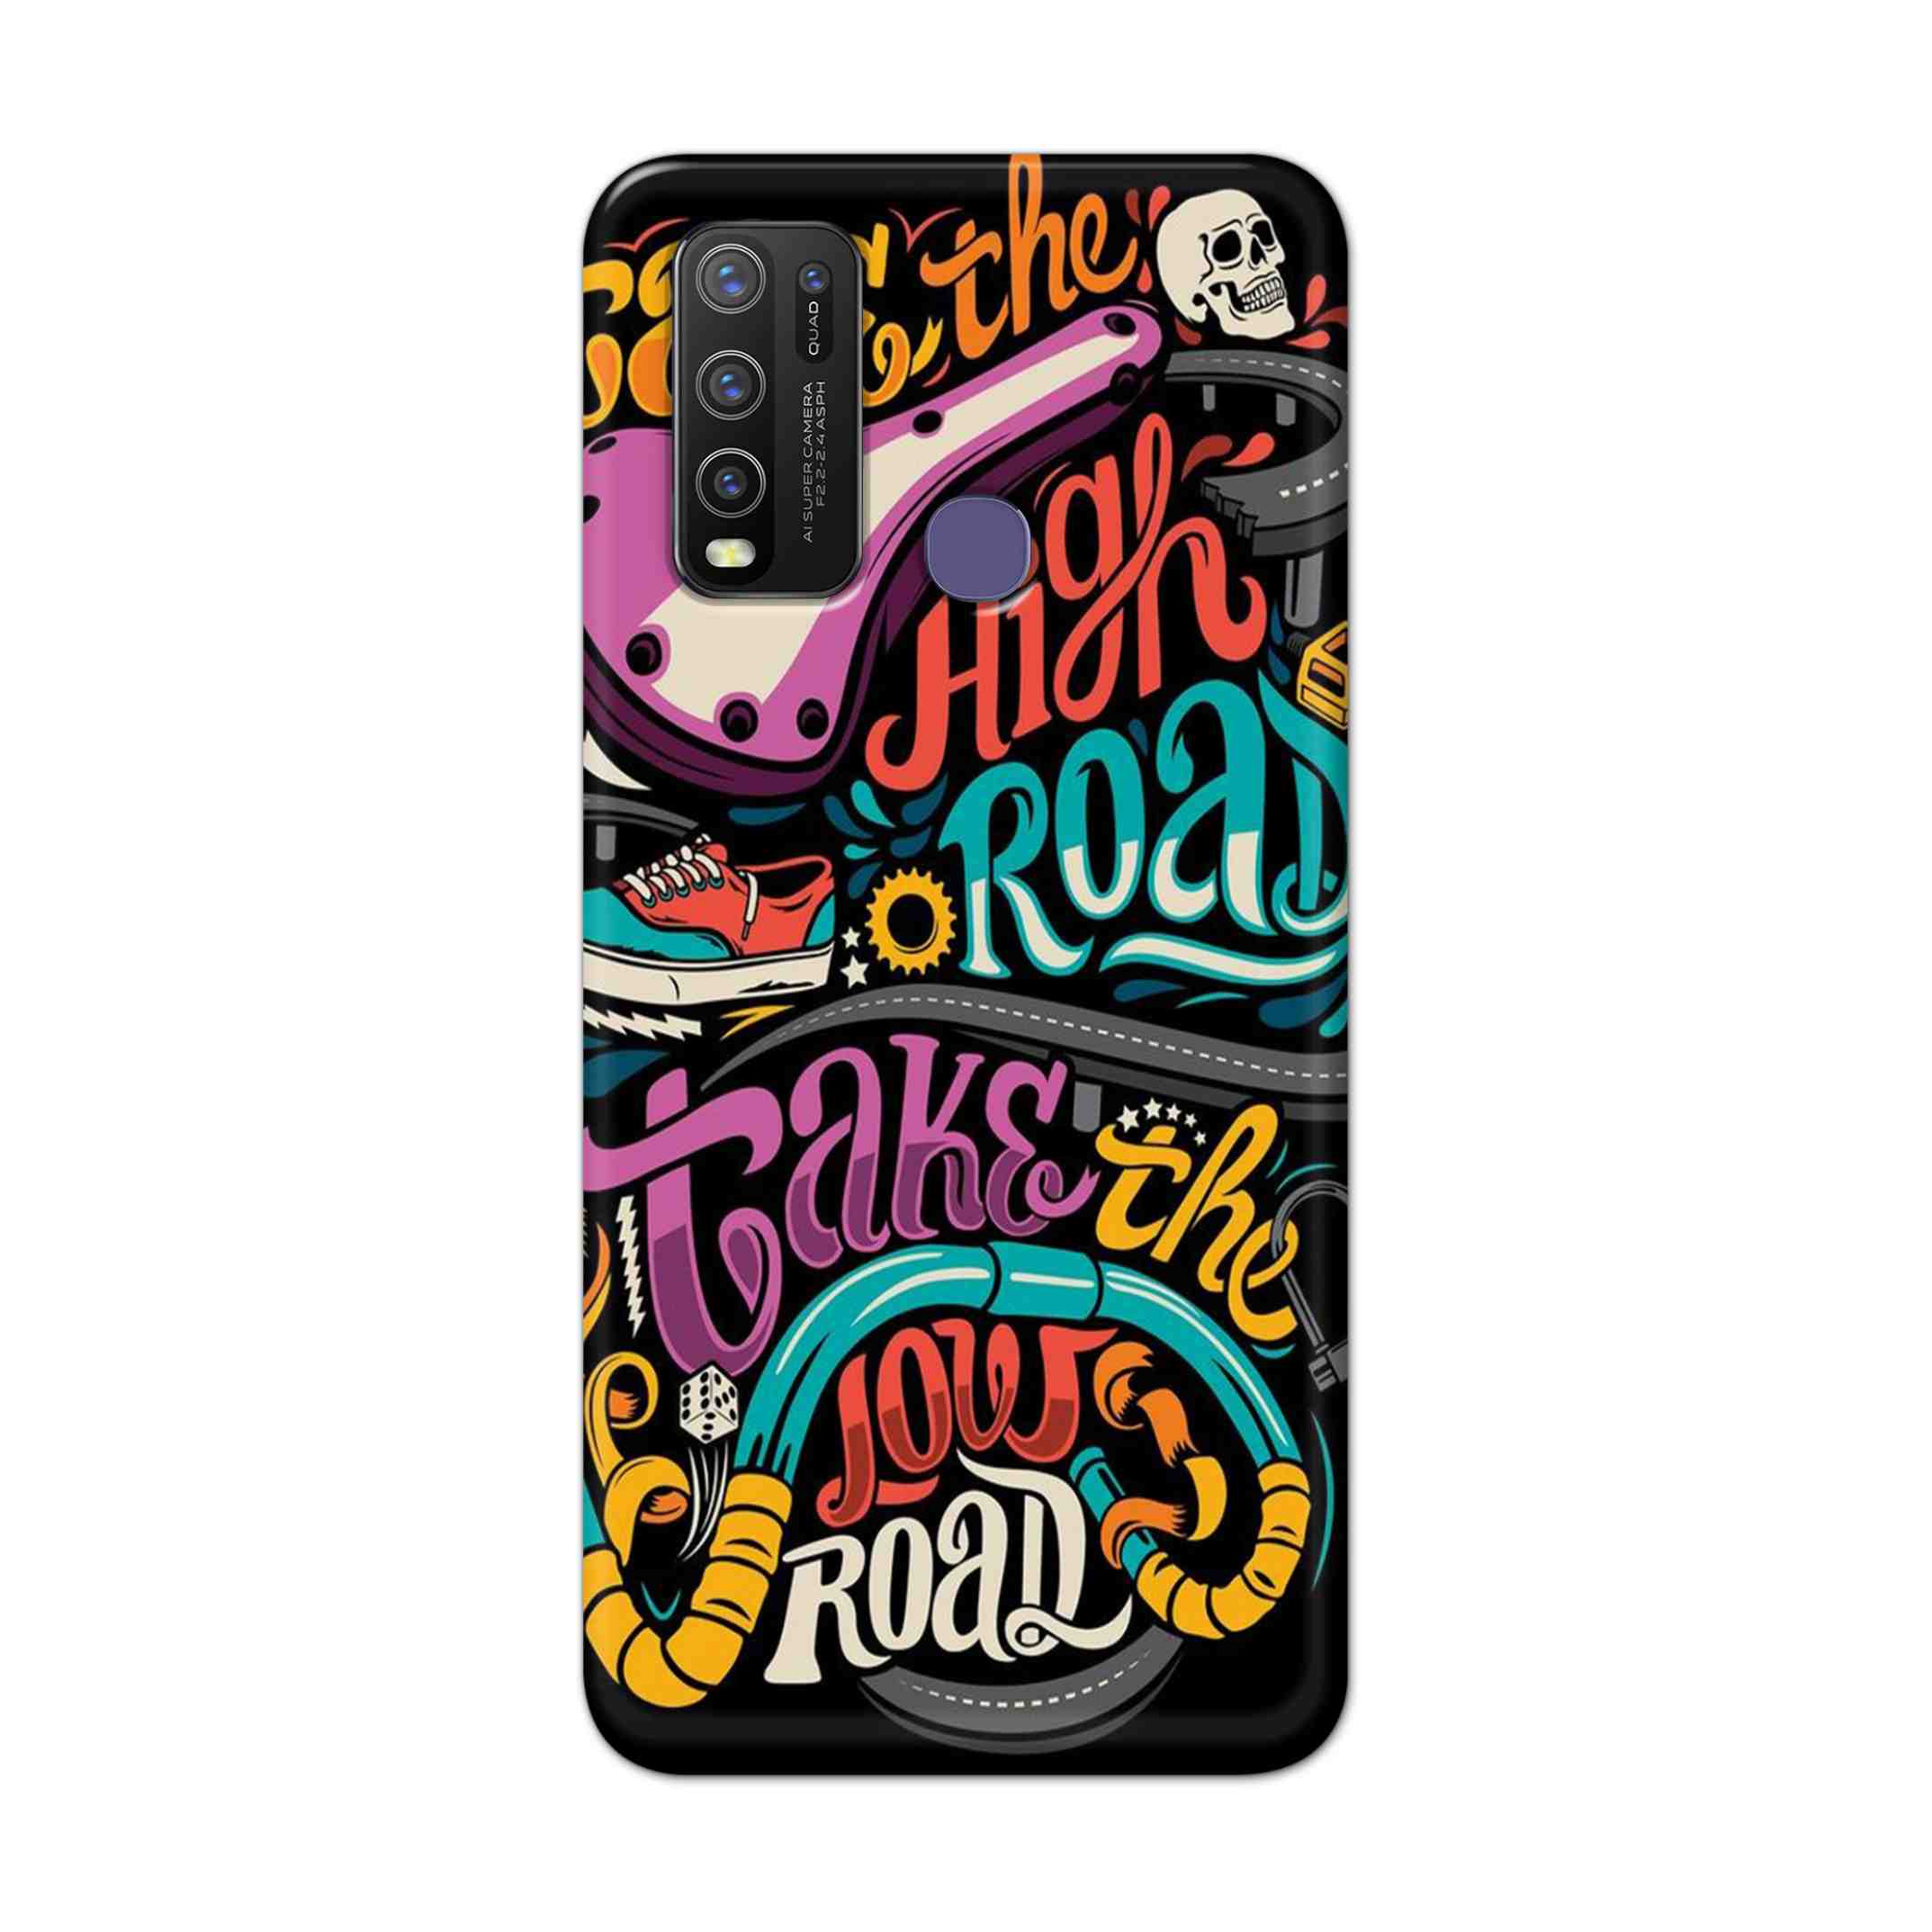 Buy Take The High Road Hard Back Mobile Phone Case Cover For Vivo Y50 Online